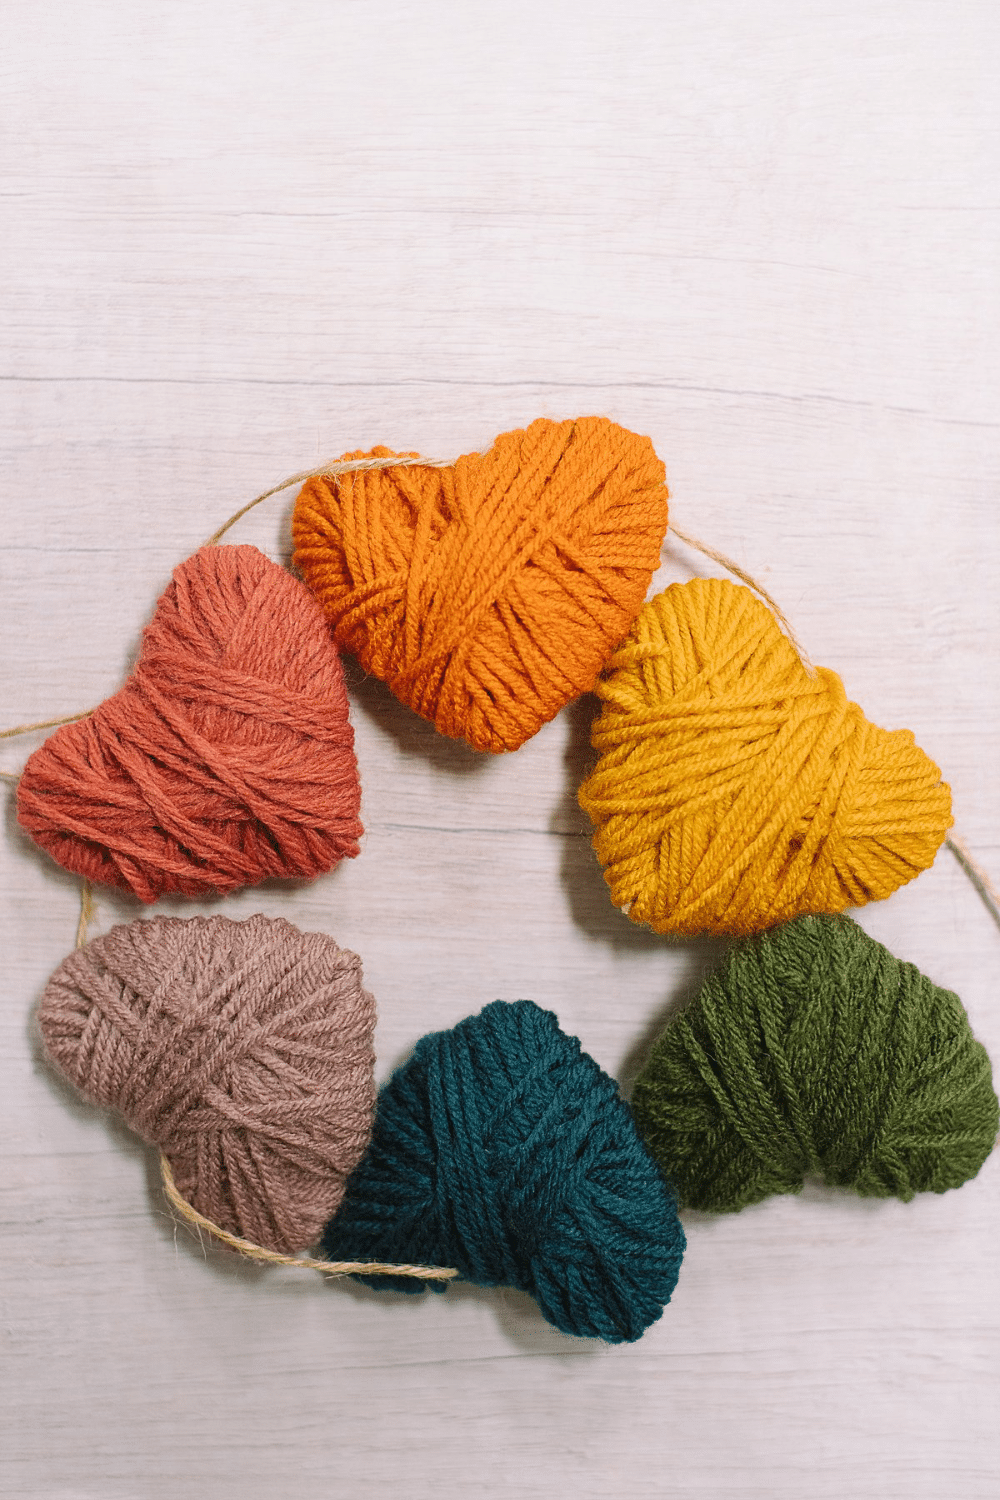 How to Make Yarn Wrapped Hearts